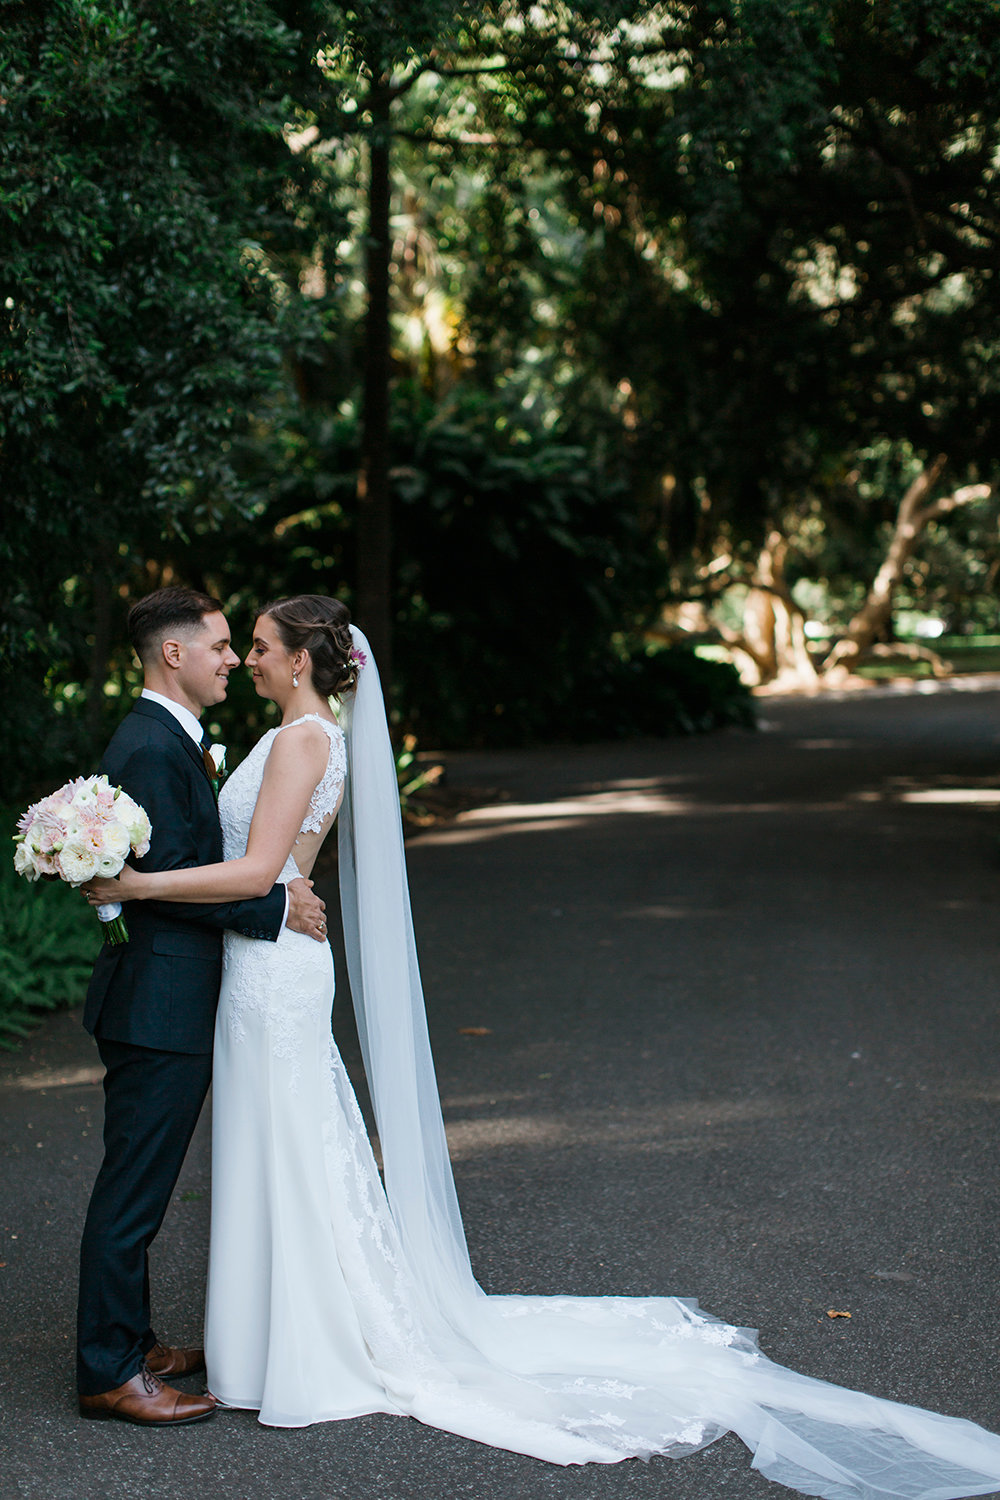 photo by Monika Berry Geelong and Melbourne Wedding Photographer